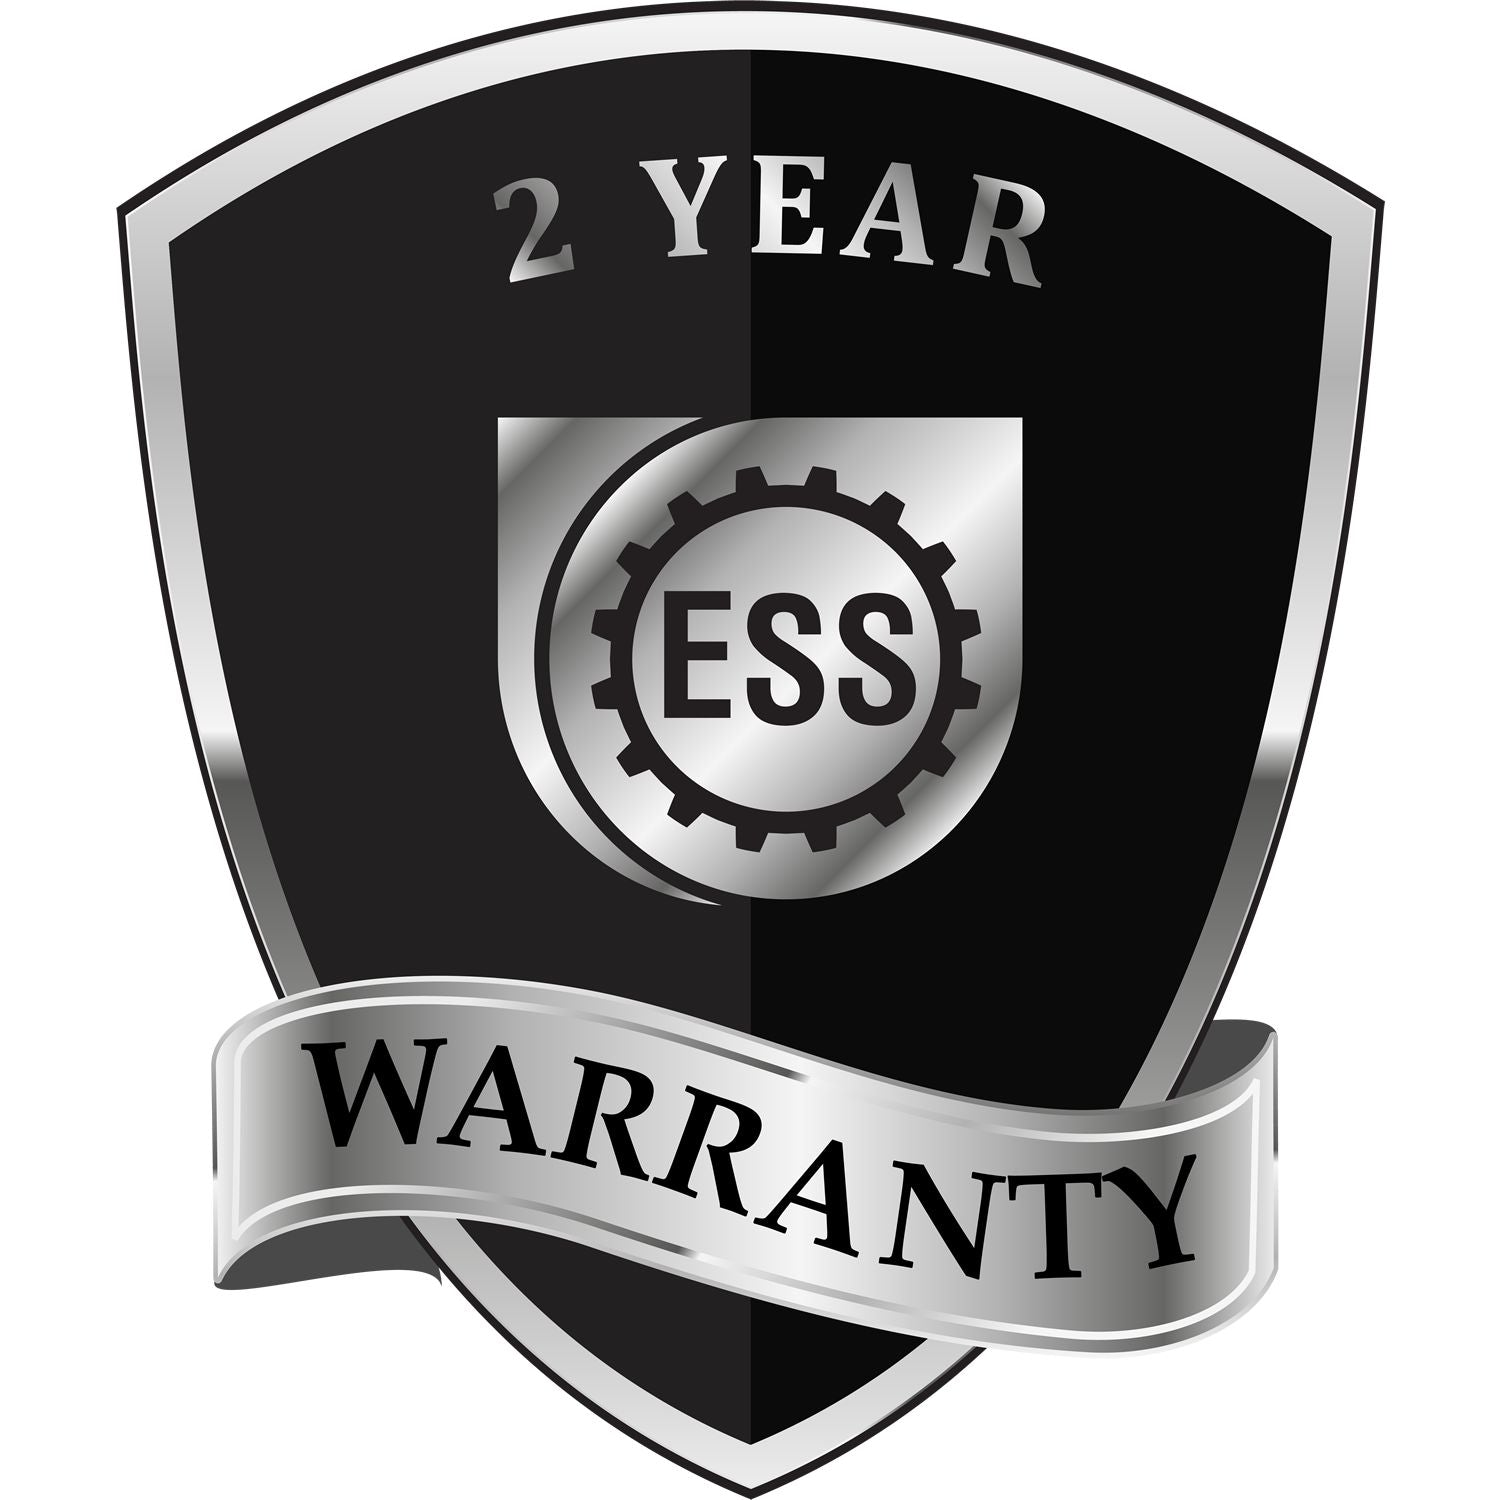 A badge or emblem showing a warranty icon for the Handheld New Mexico Land Surveyor Seal